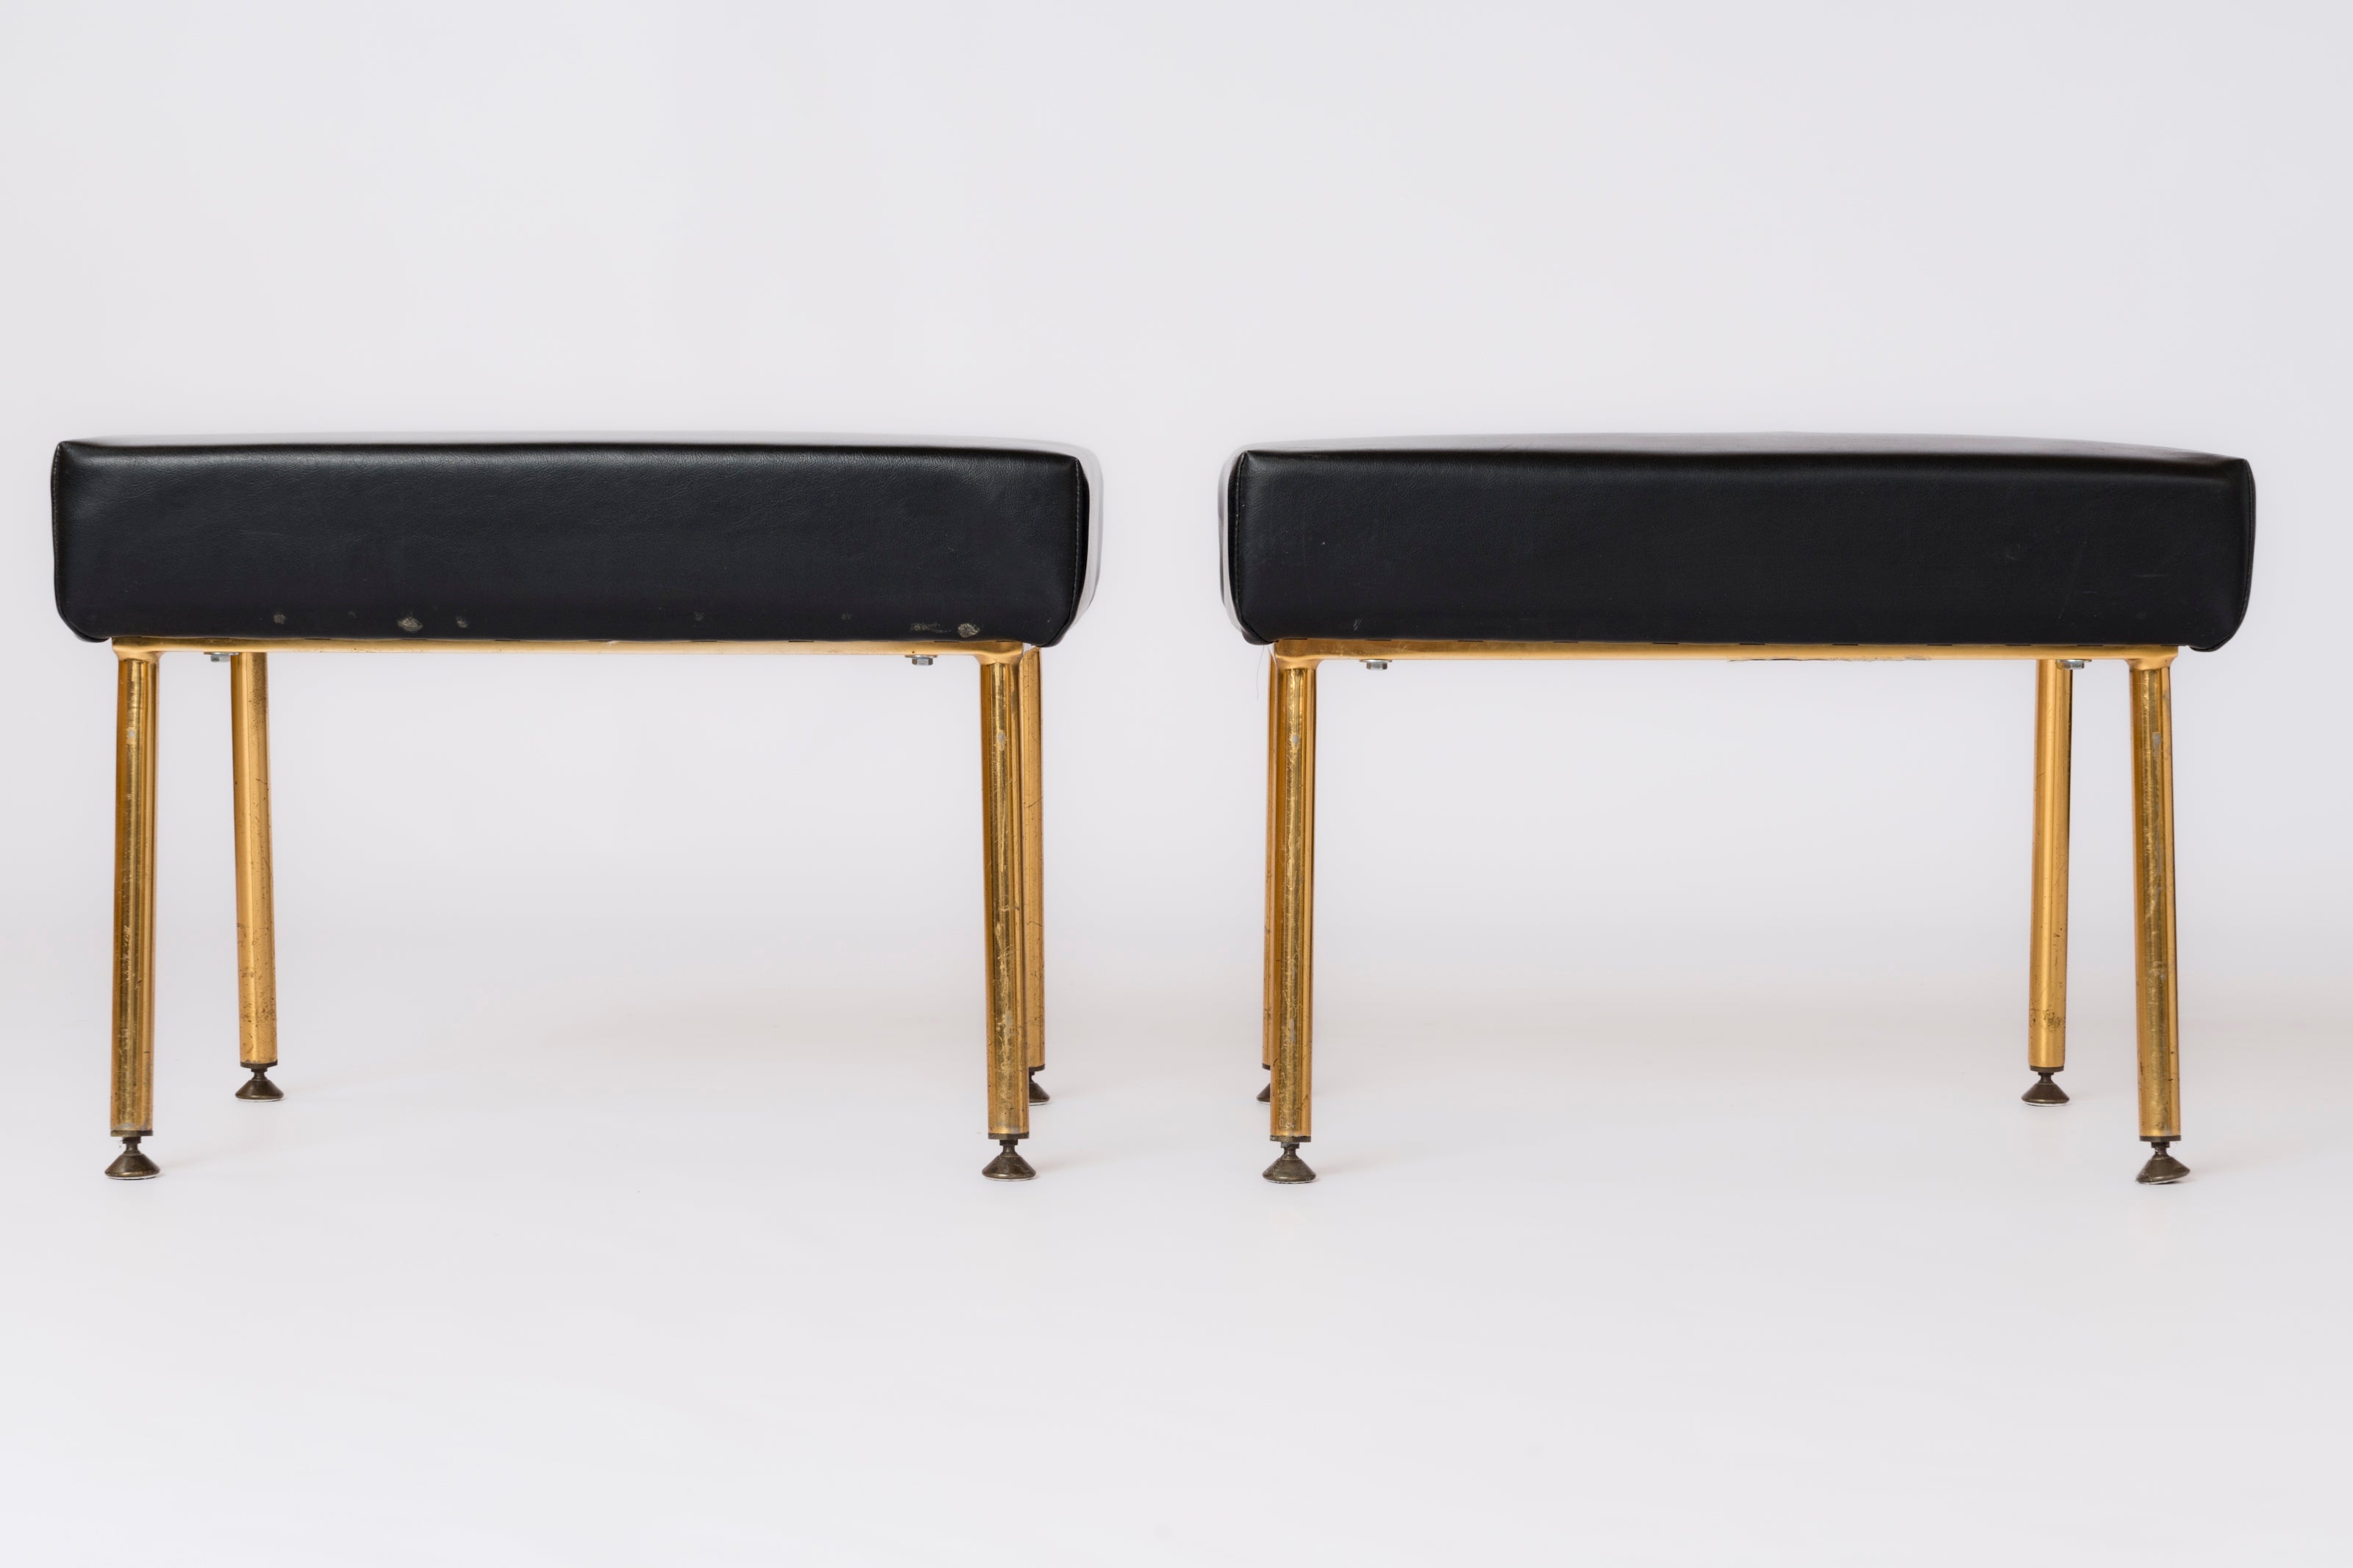 Pair of minimalist footstools or benches by Airborne, France, 1960's. Signed under cushions. These stools are made of steel frame sitting on a four gilt anodized legs structure.  The original cushions are made of black faux leather. COM option